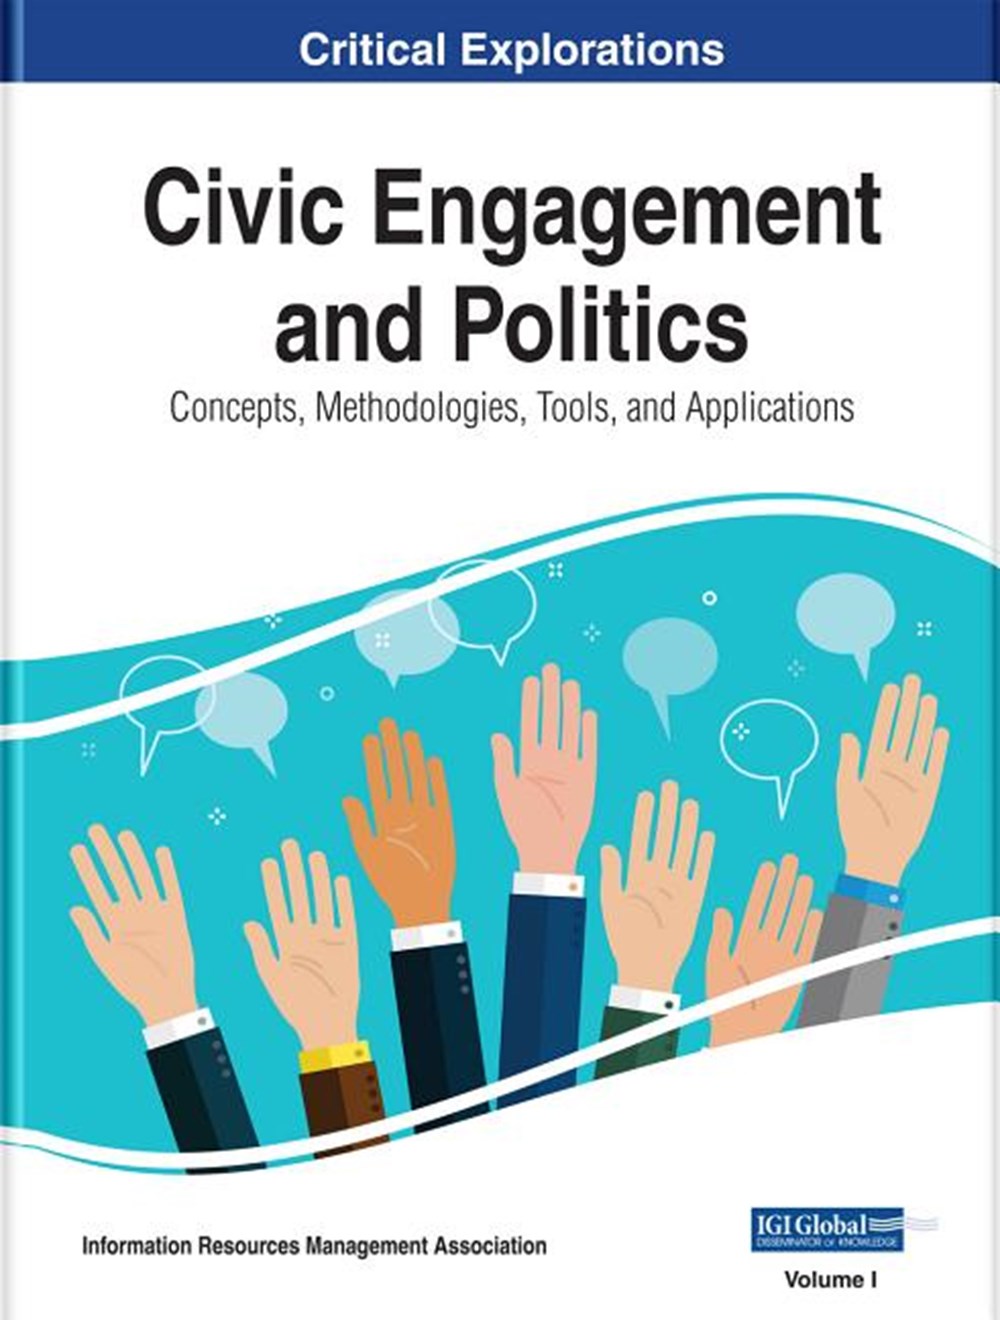 Civic Engagement and Politics: Concepts, Methodologies, Tools, and Applications, 3 volume